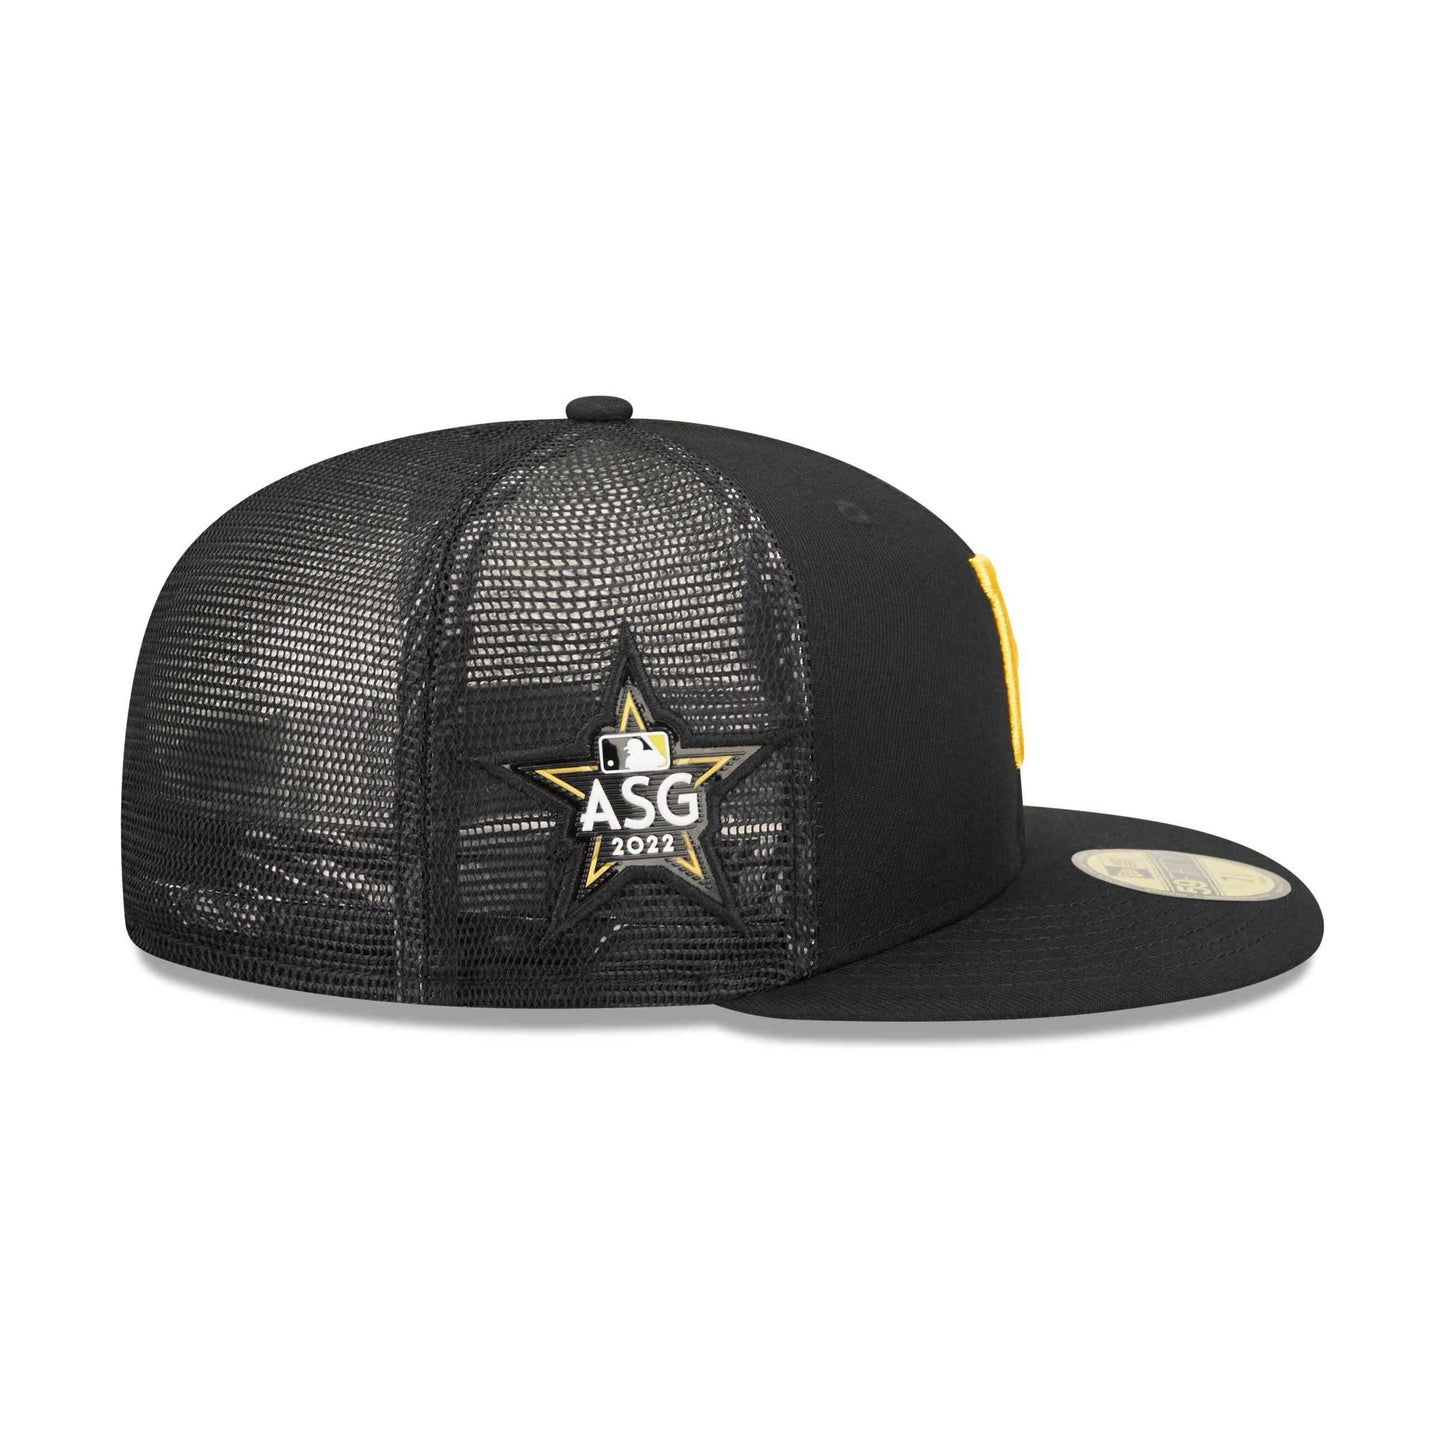 NEW ERA 59FIFTY MLB PITTSBURGH PIRATES ALL STAR GAME 2022 BLACK / TROPIC GREY UV FITTED TRUCKER CAP